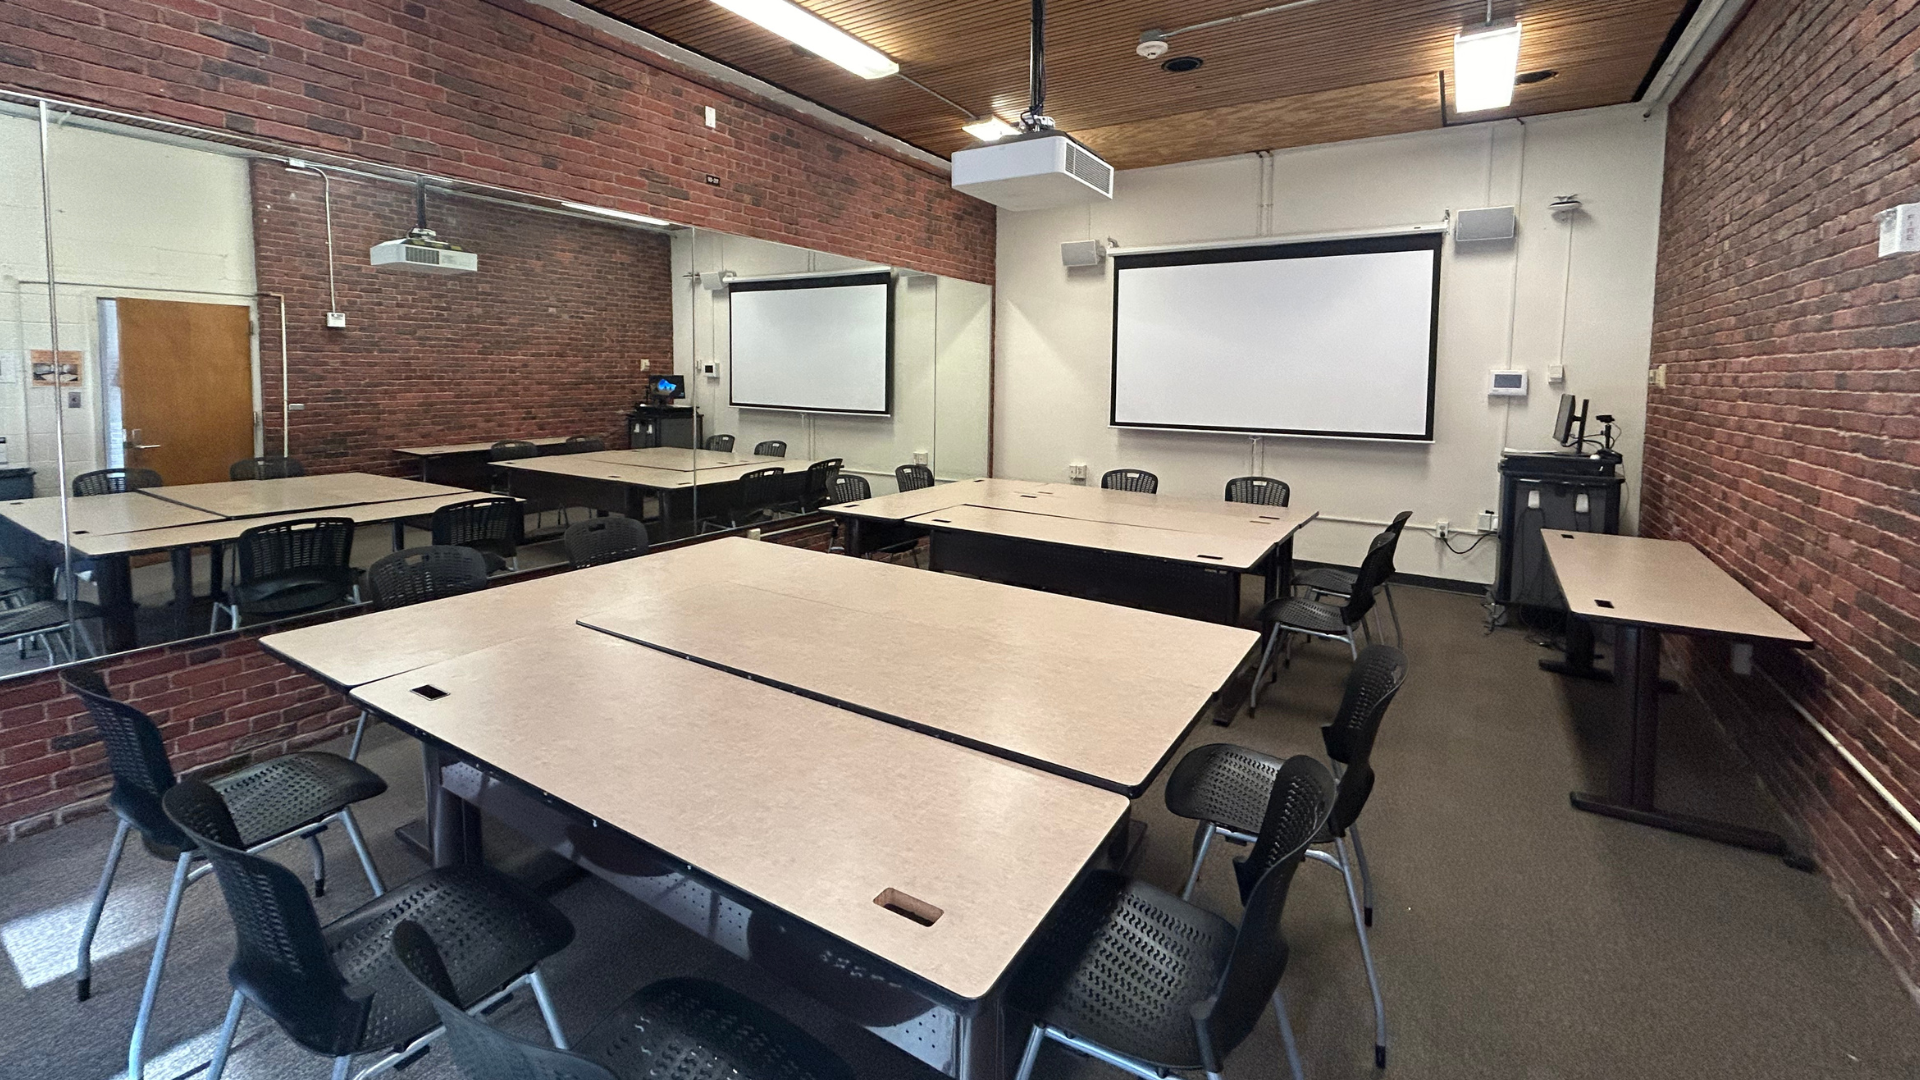 Image of the ICC classroom.